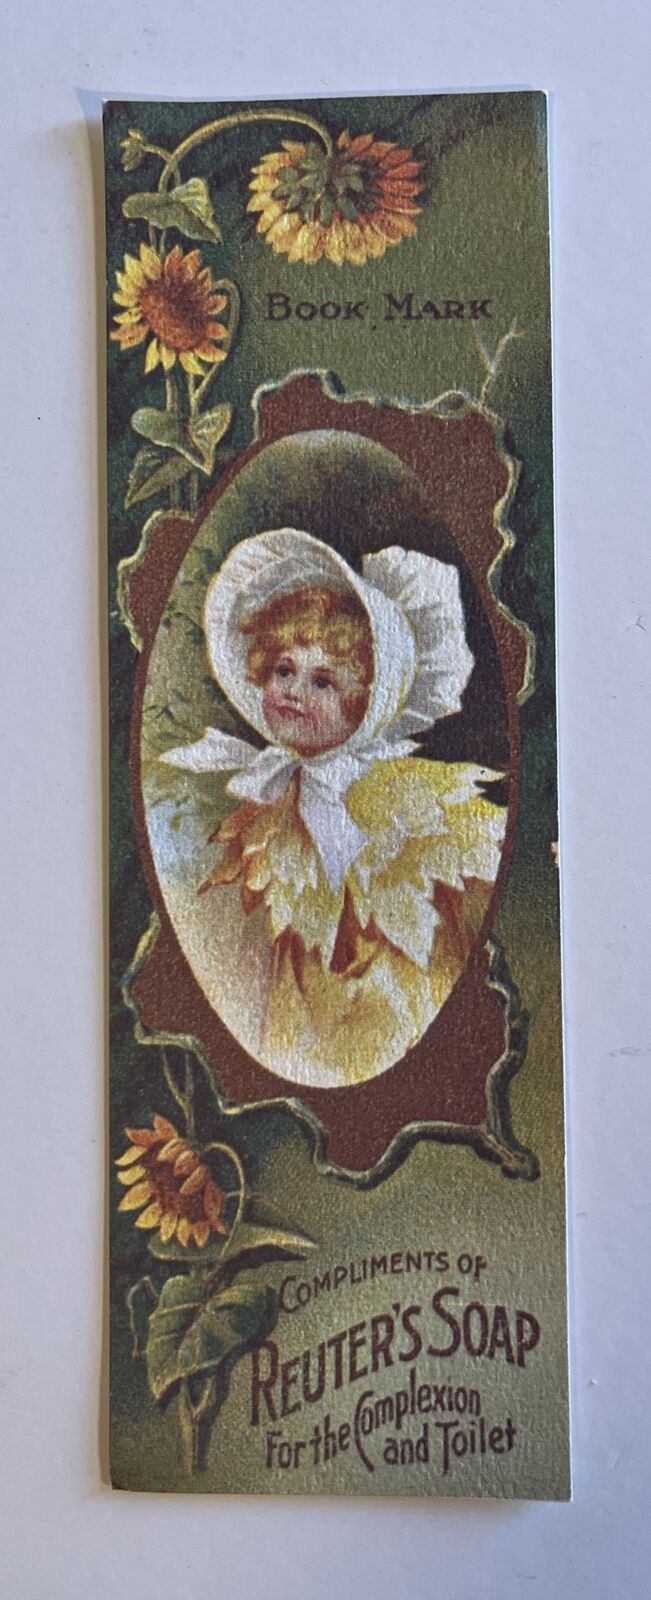 Vintage Replicate Victorian Trade Card Bookmark Advertising Reuter’s Soap 6x2”